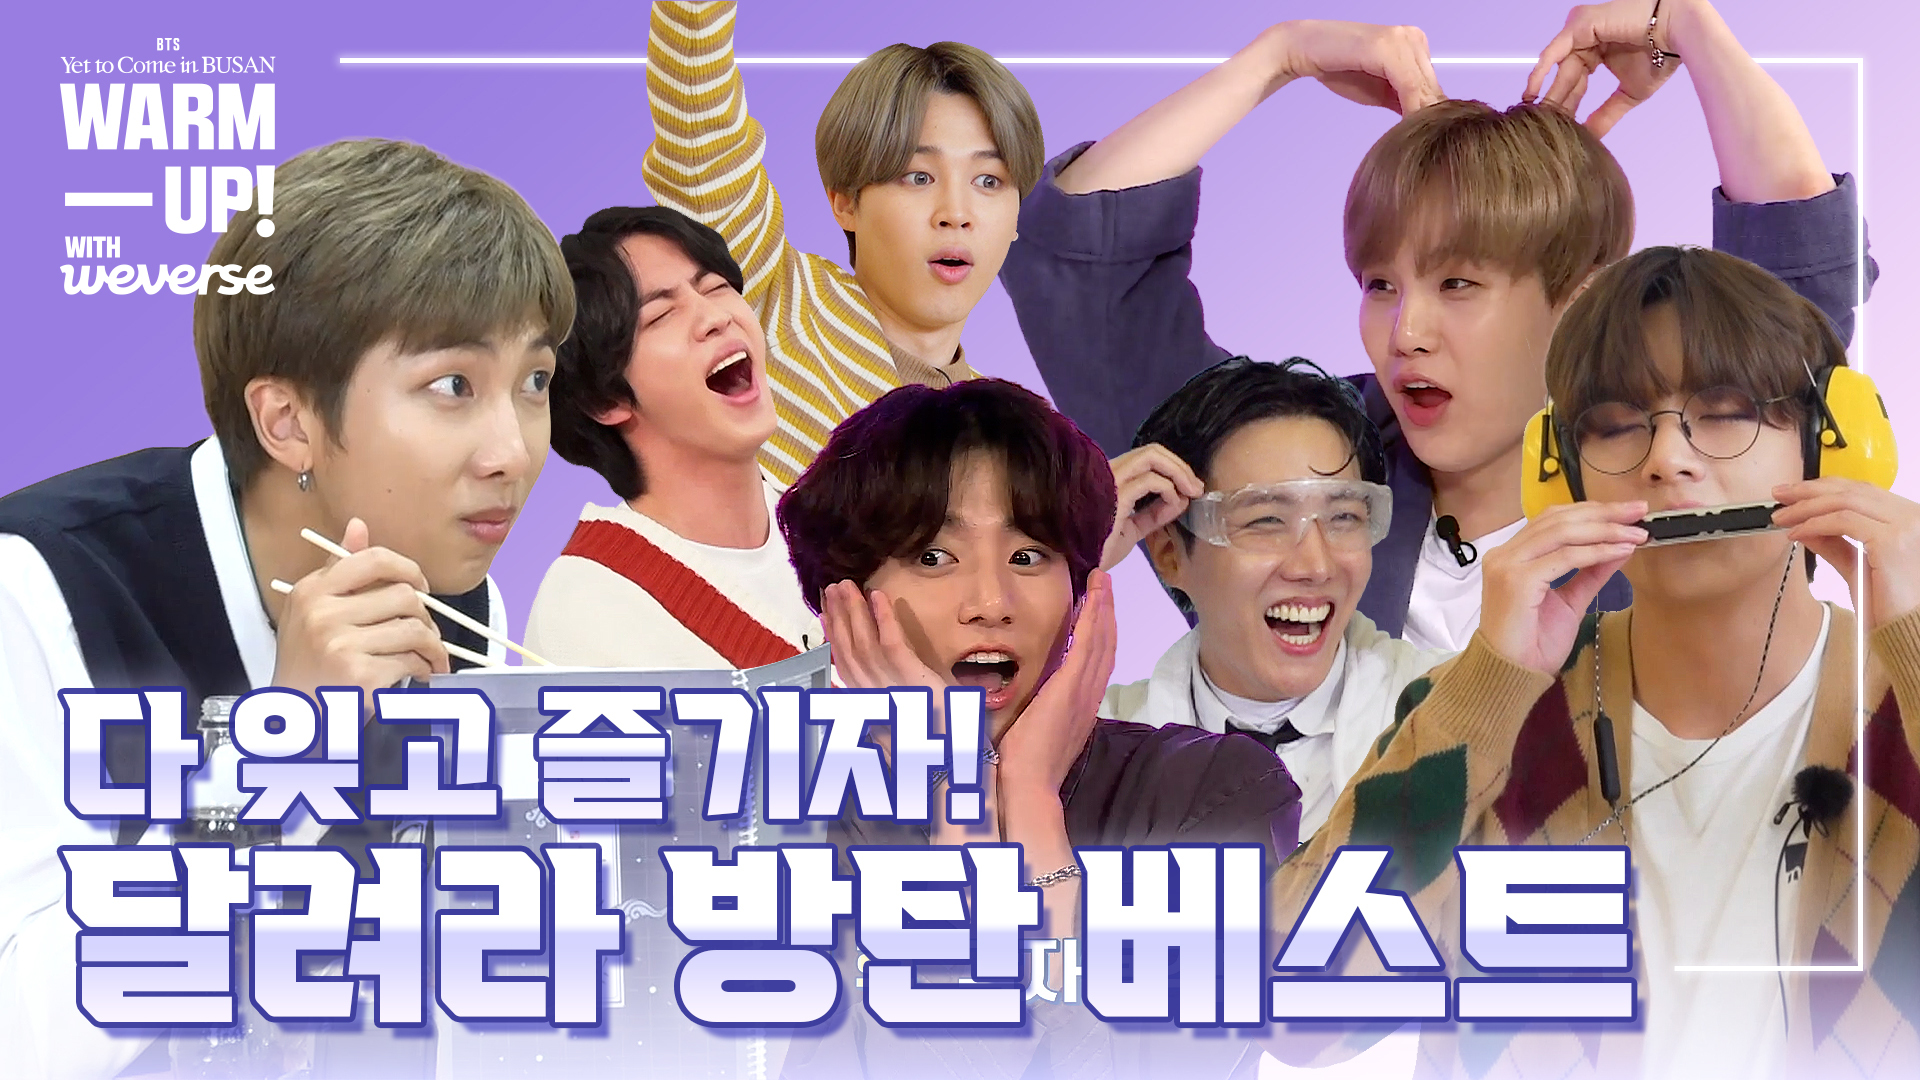 Run BTS is back: Here are 8 most-entertaining episodes featuring